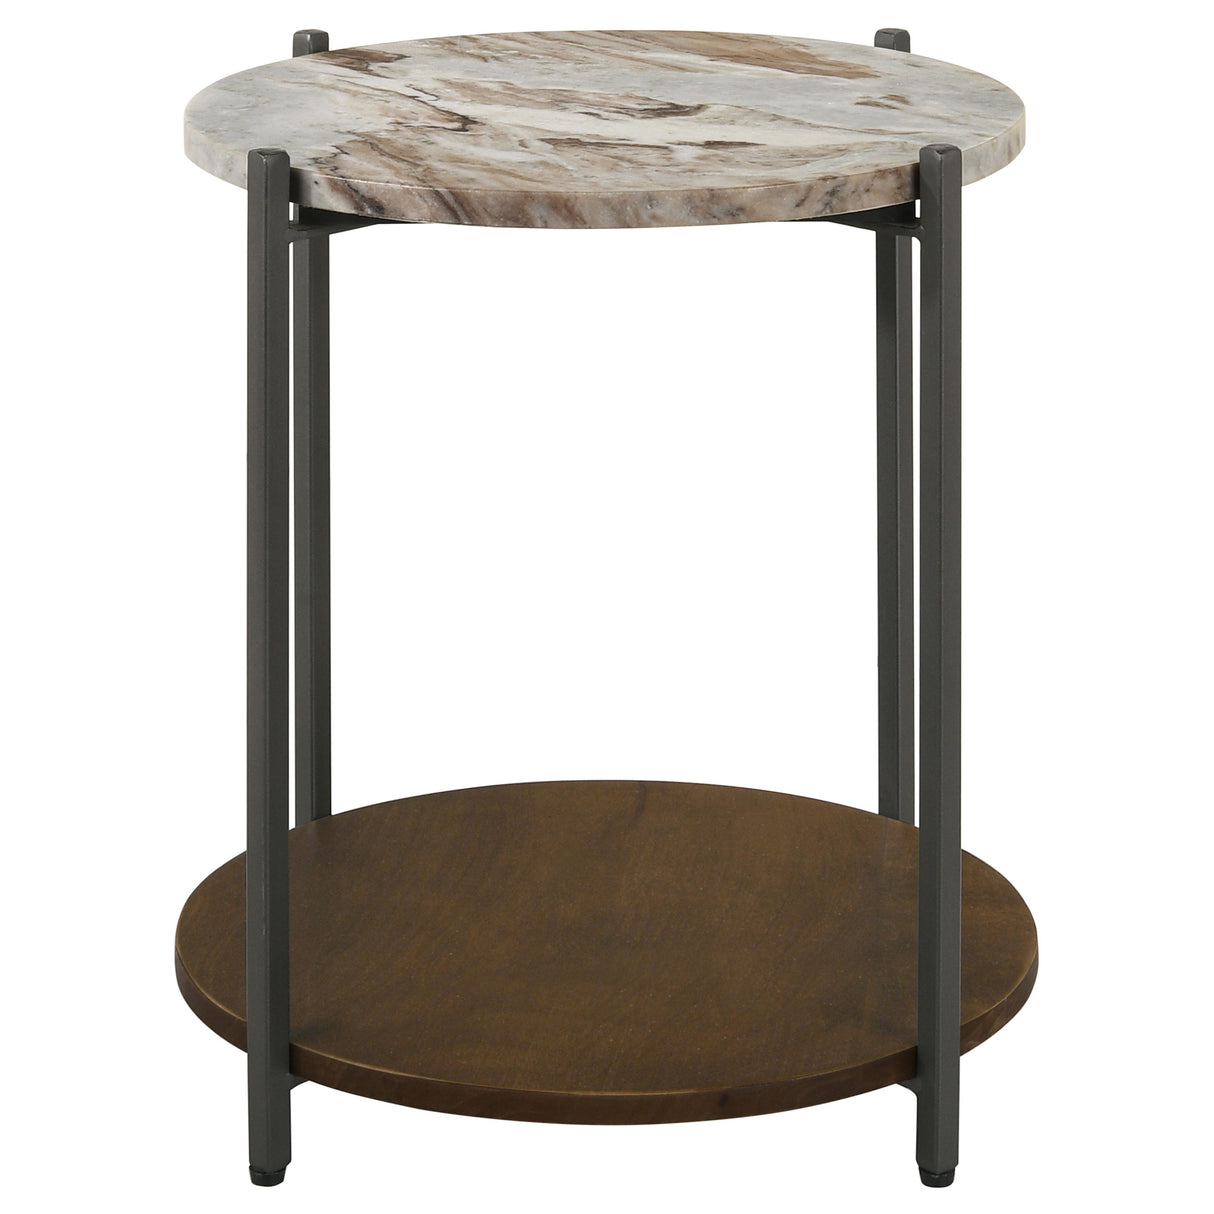 Side Table - Noemie Round Accent Table with Marble Top White and Gunmetal